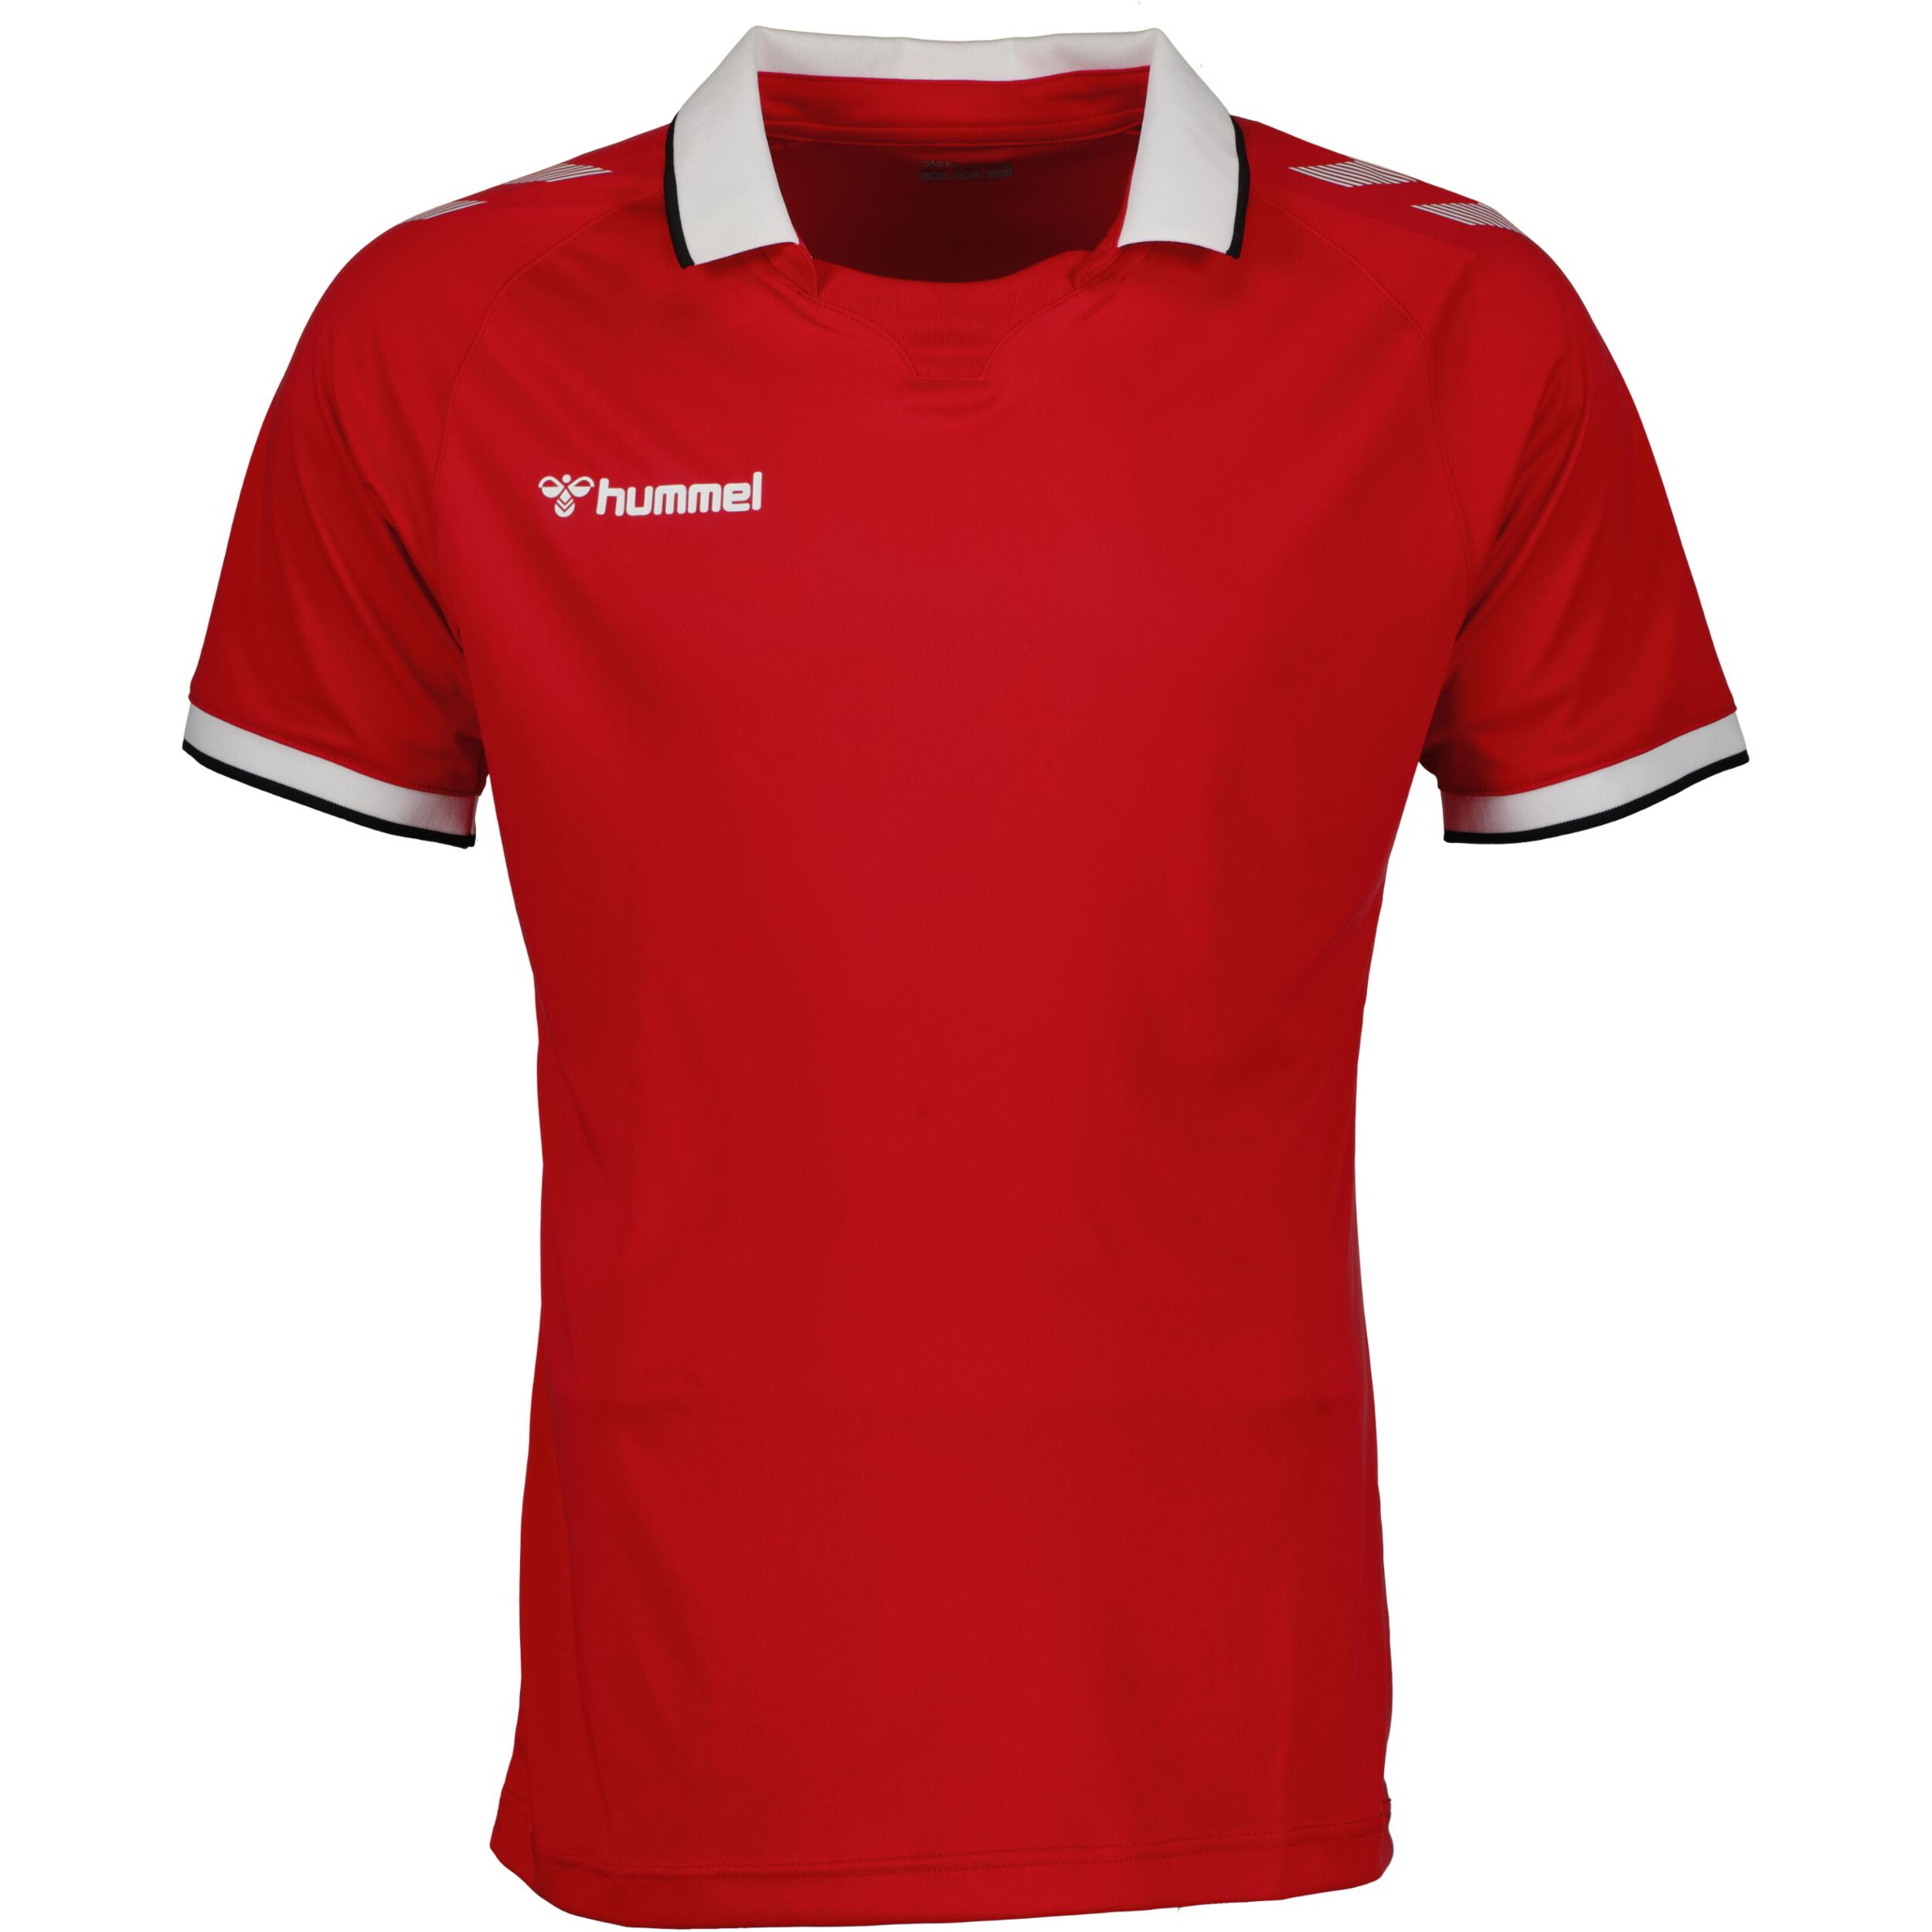 Impact jersey for juniors, great for football, in red/white 1/3